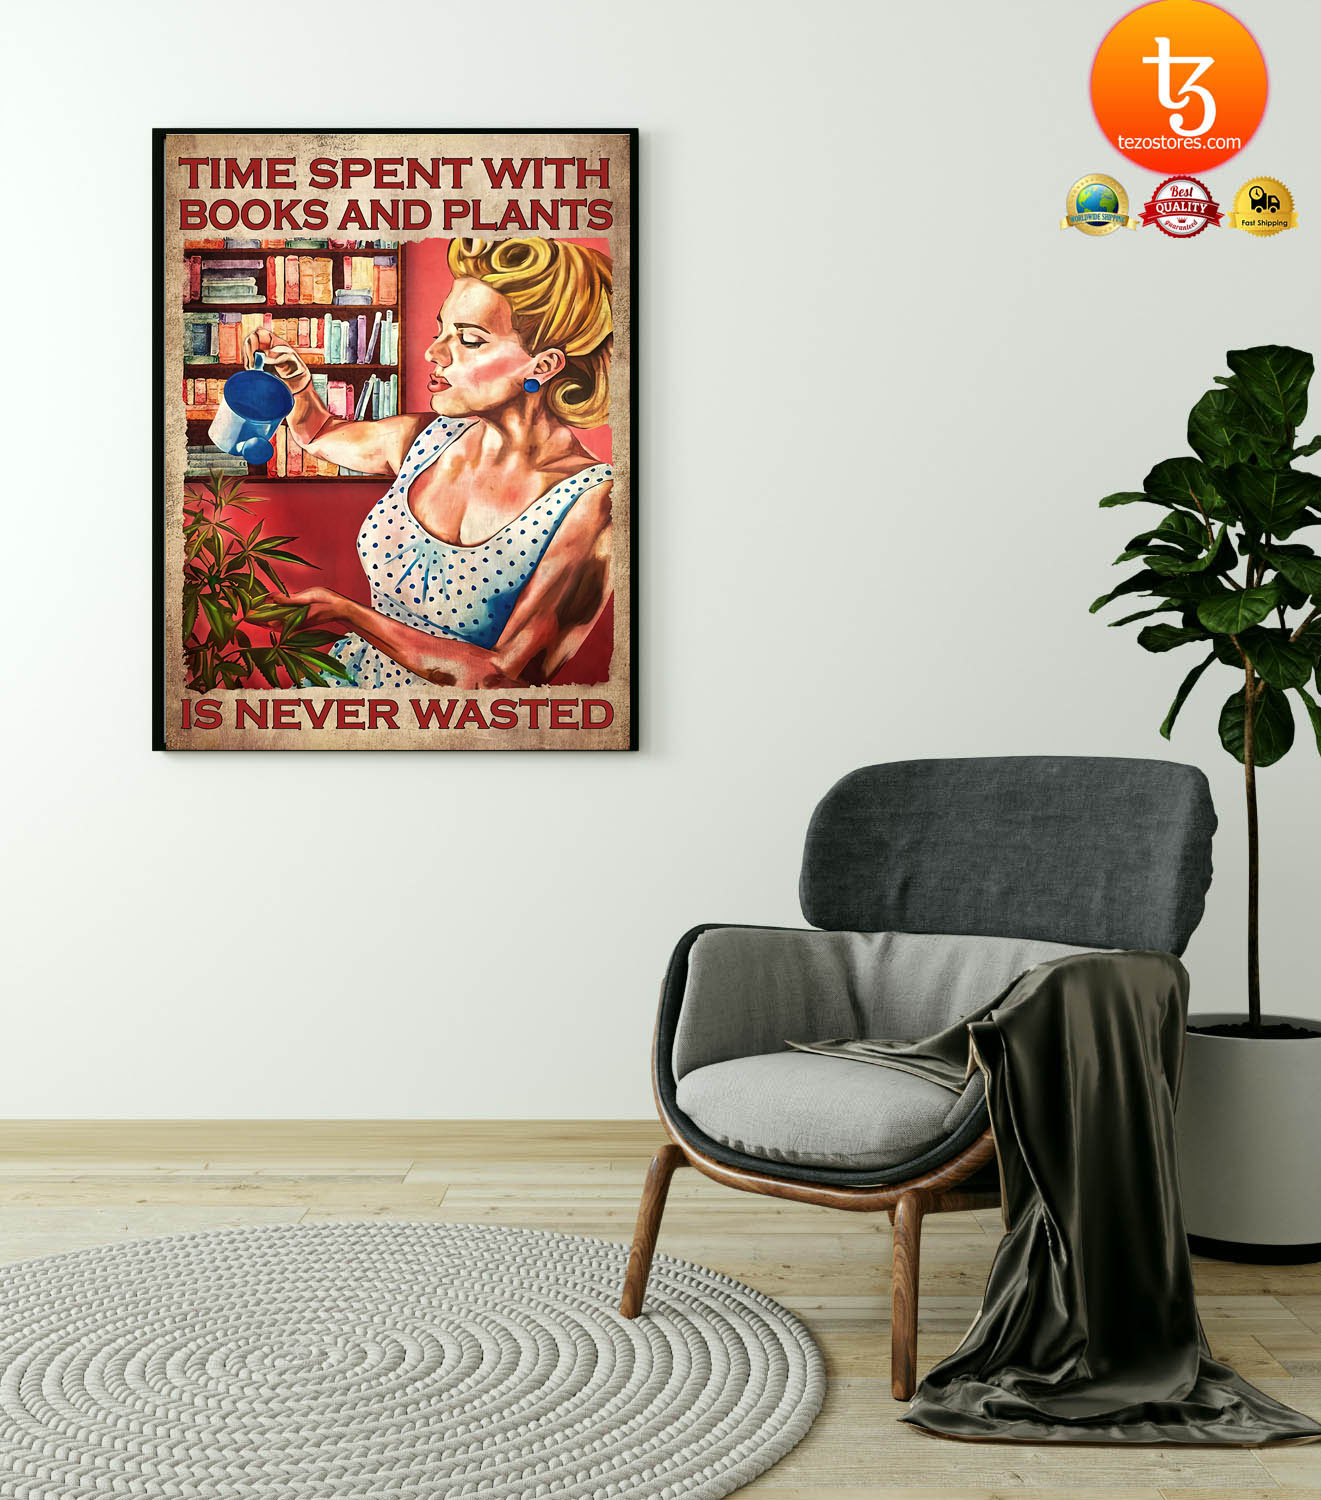 Time spent with books and plants is never wasted poster1